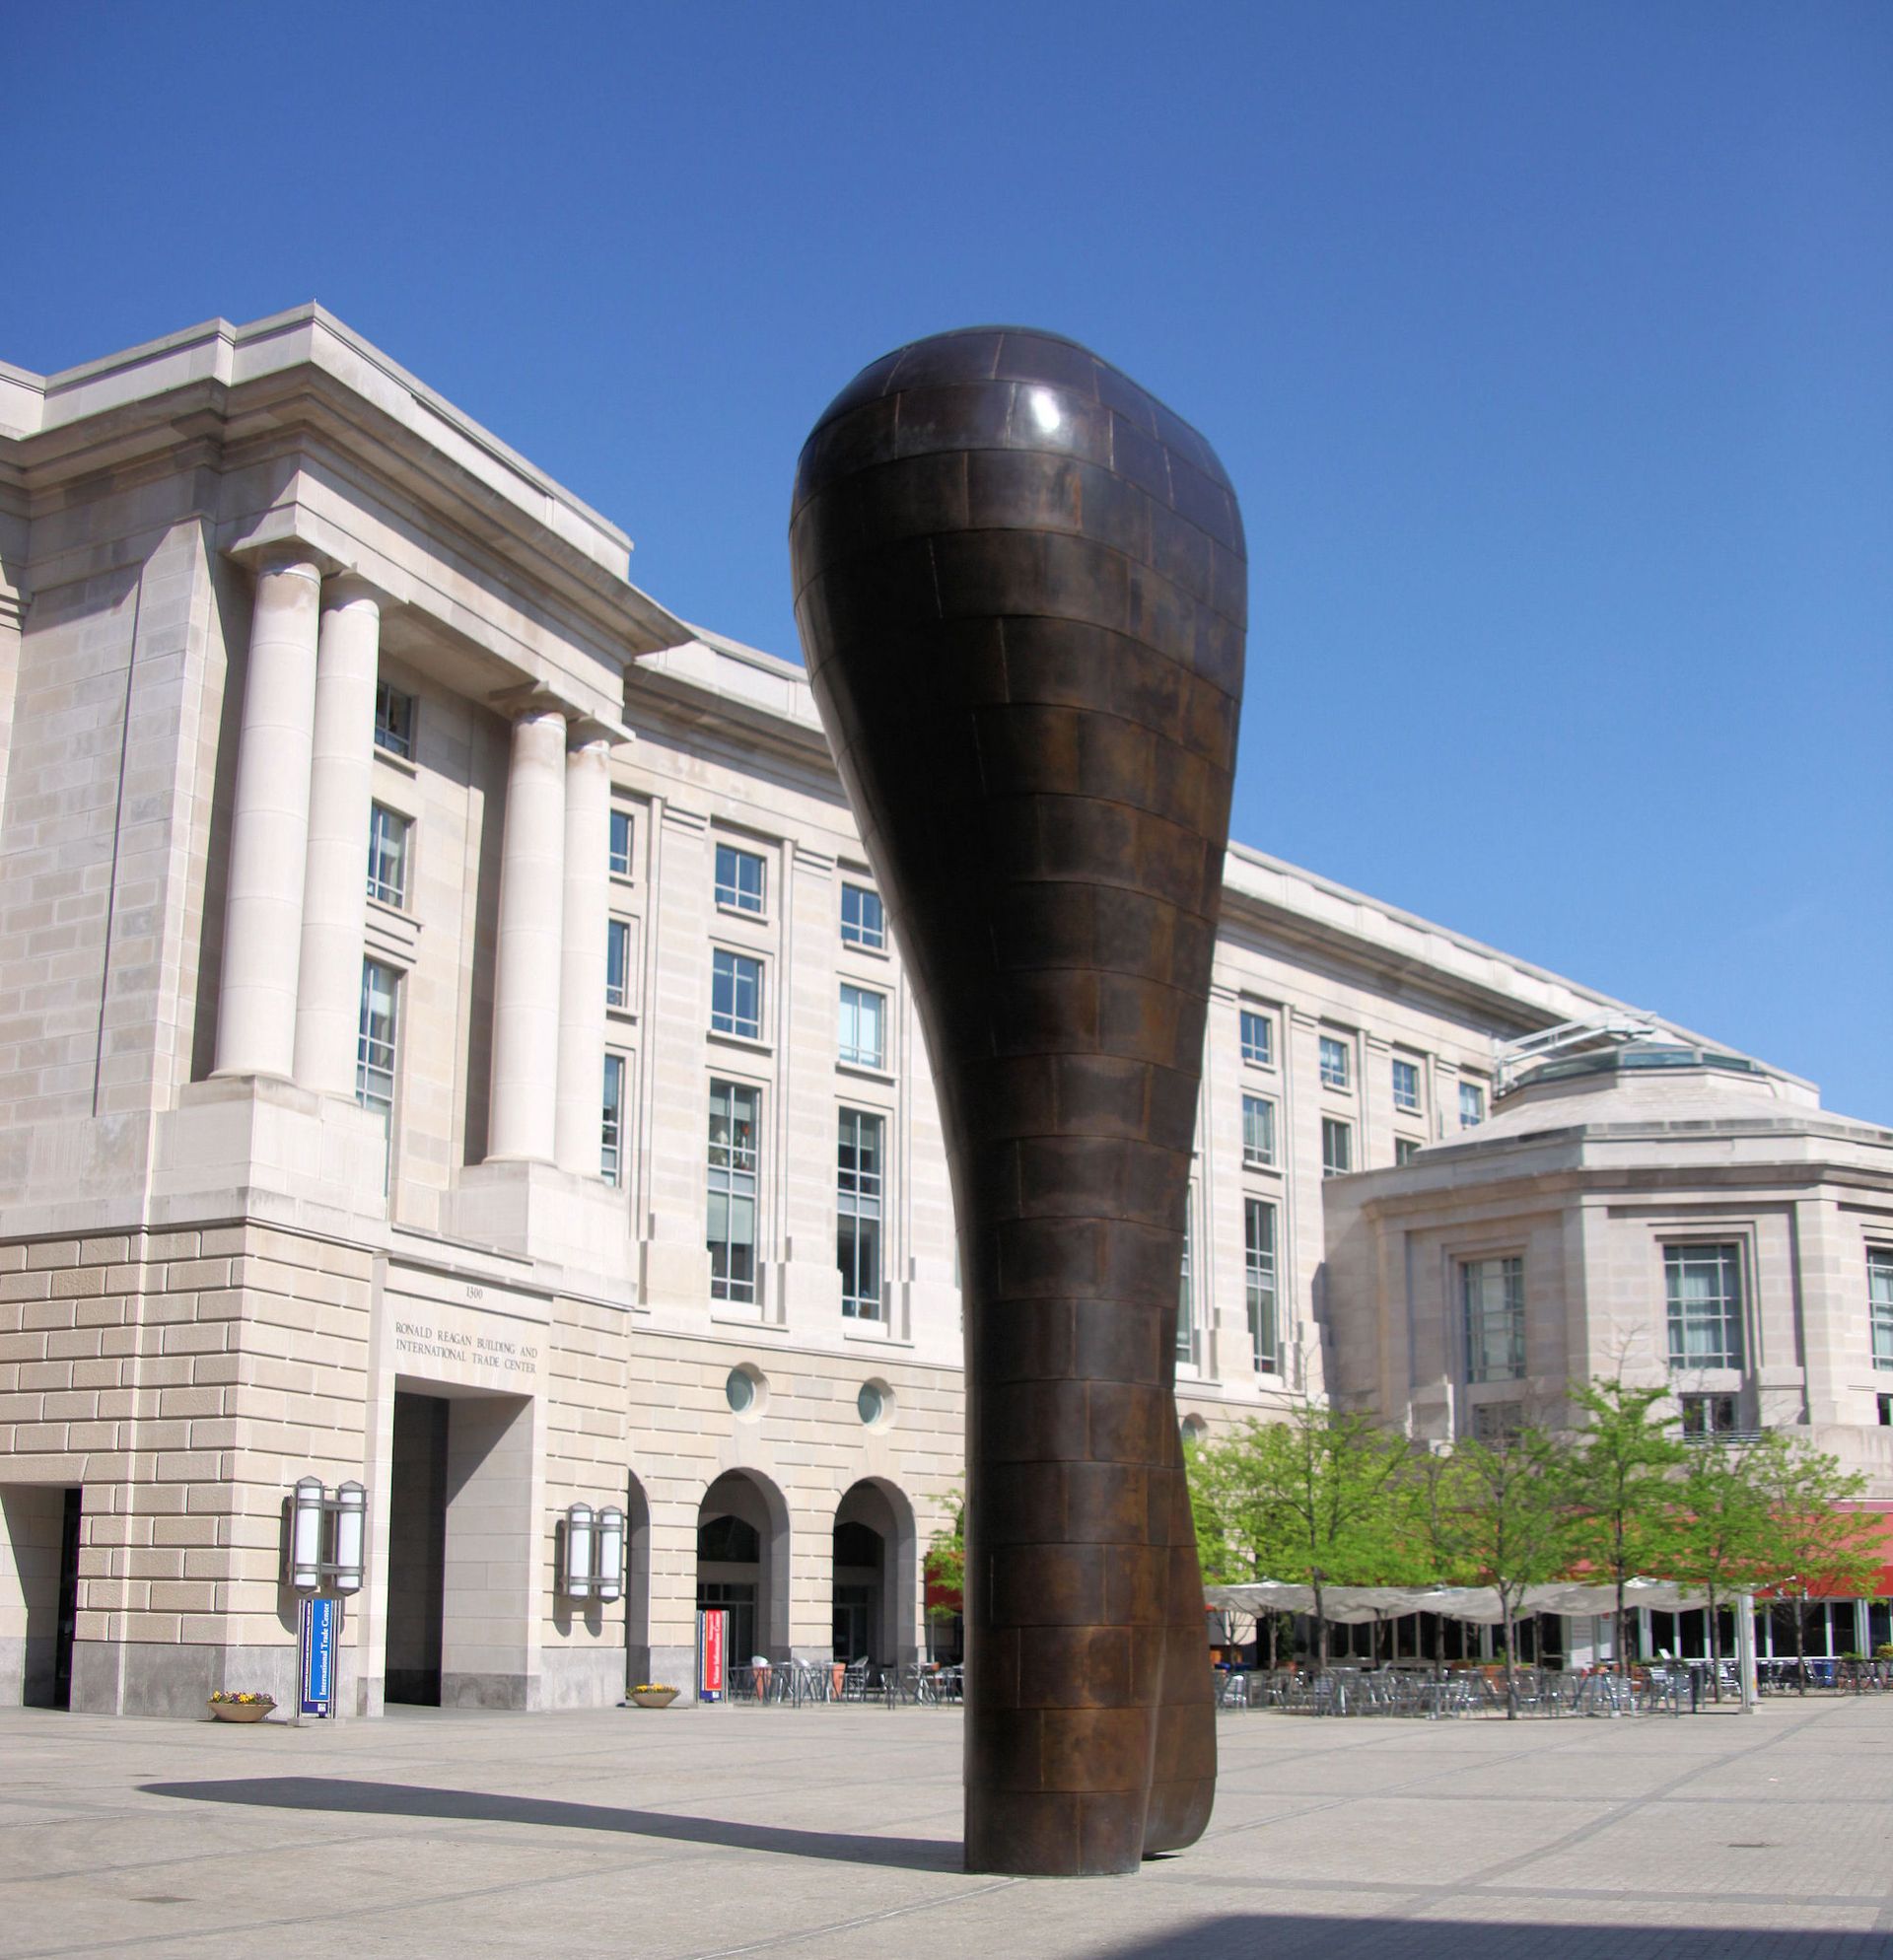 Bearing Witness (1997), a work by Martin Puryear commissioned by the General Services Administration through its Art in Architecture program, on Woodrow Wilson Plaza in Washington, DC Photo by Tim Evanson, via Flickr